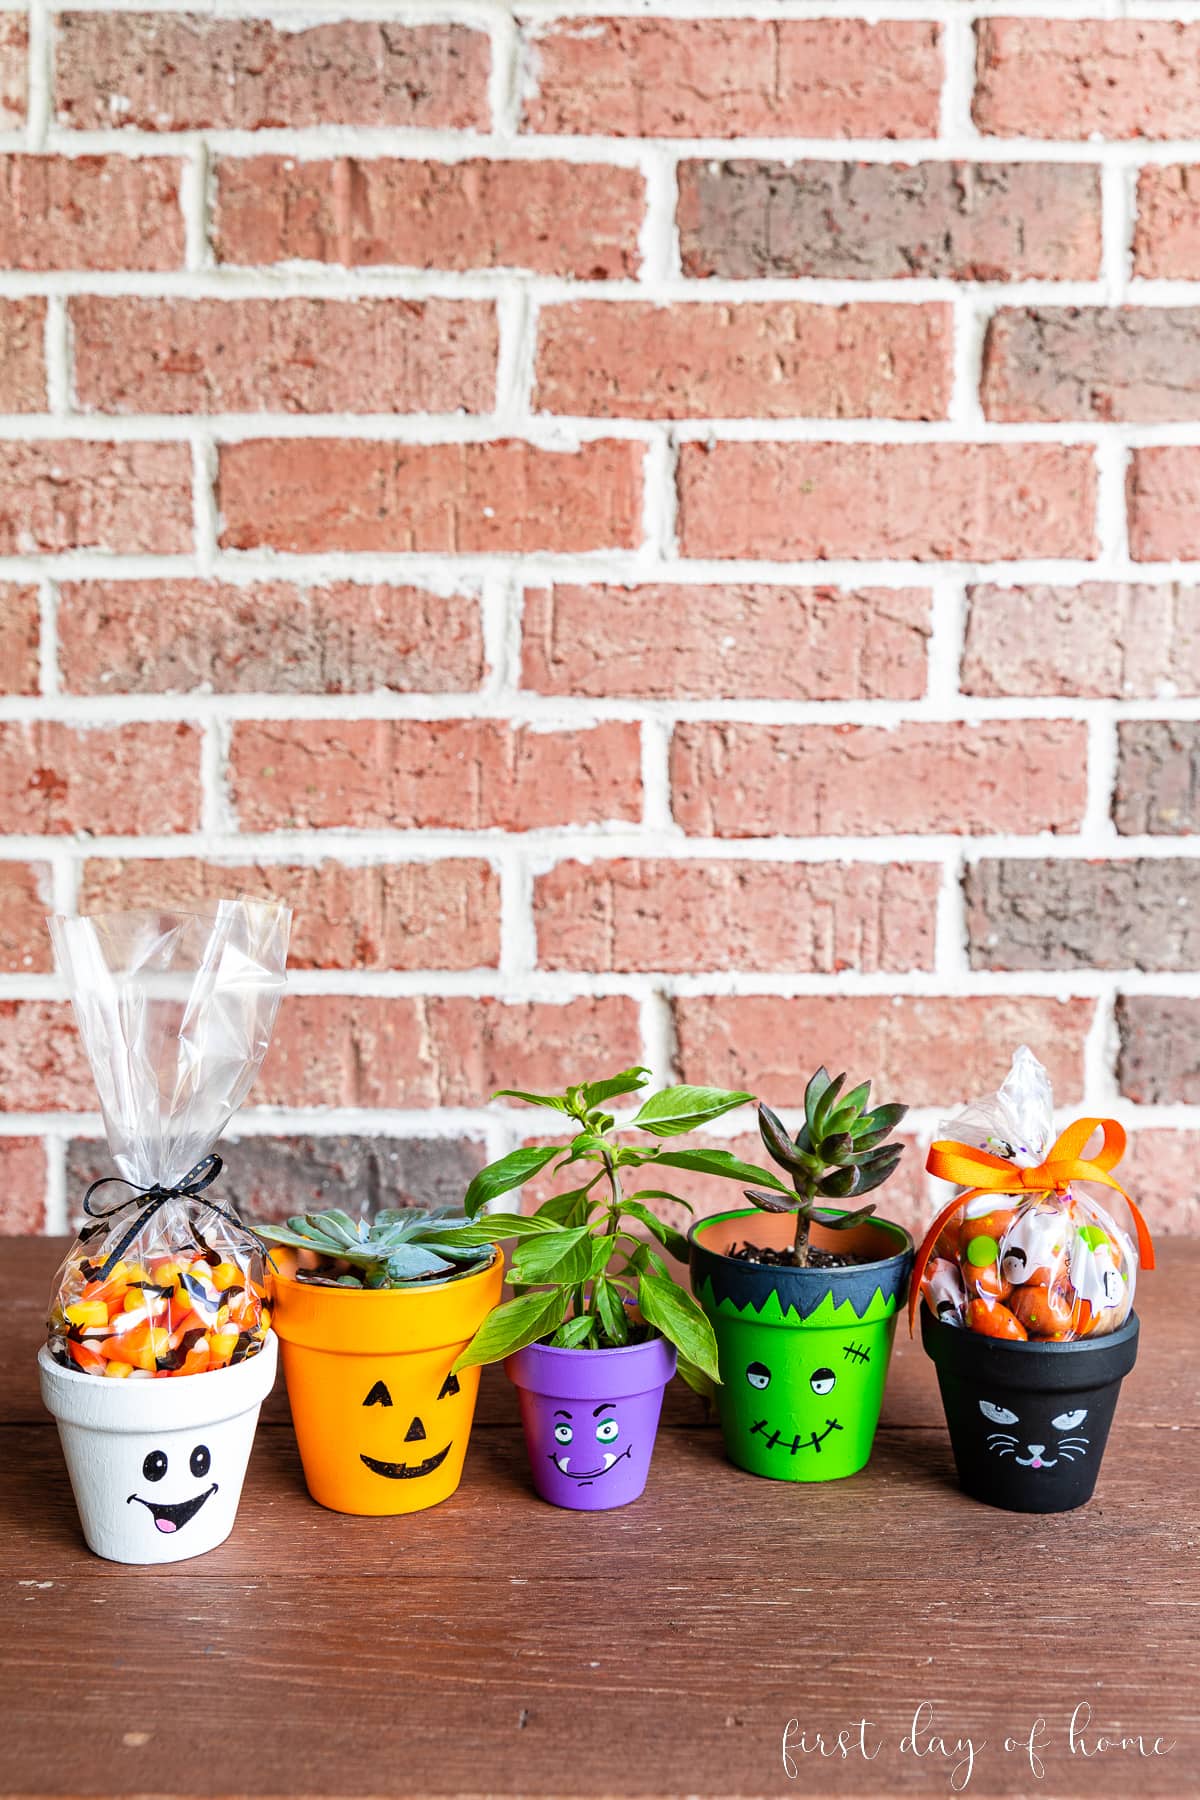 Five painted flower pots with a Halloween theme, including a ghost, a jack-o-lantern, a purple monster face, Frankenstein, and a black cat